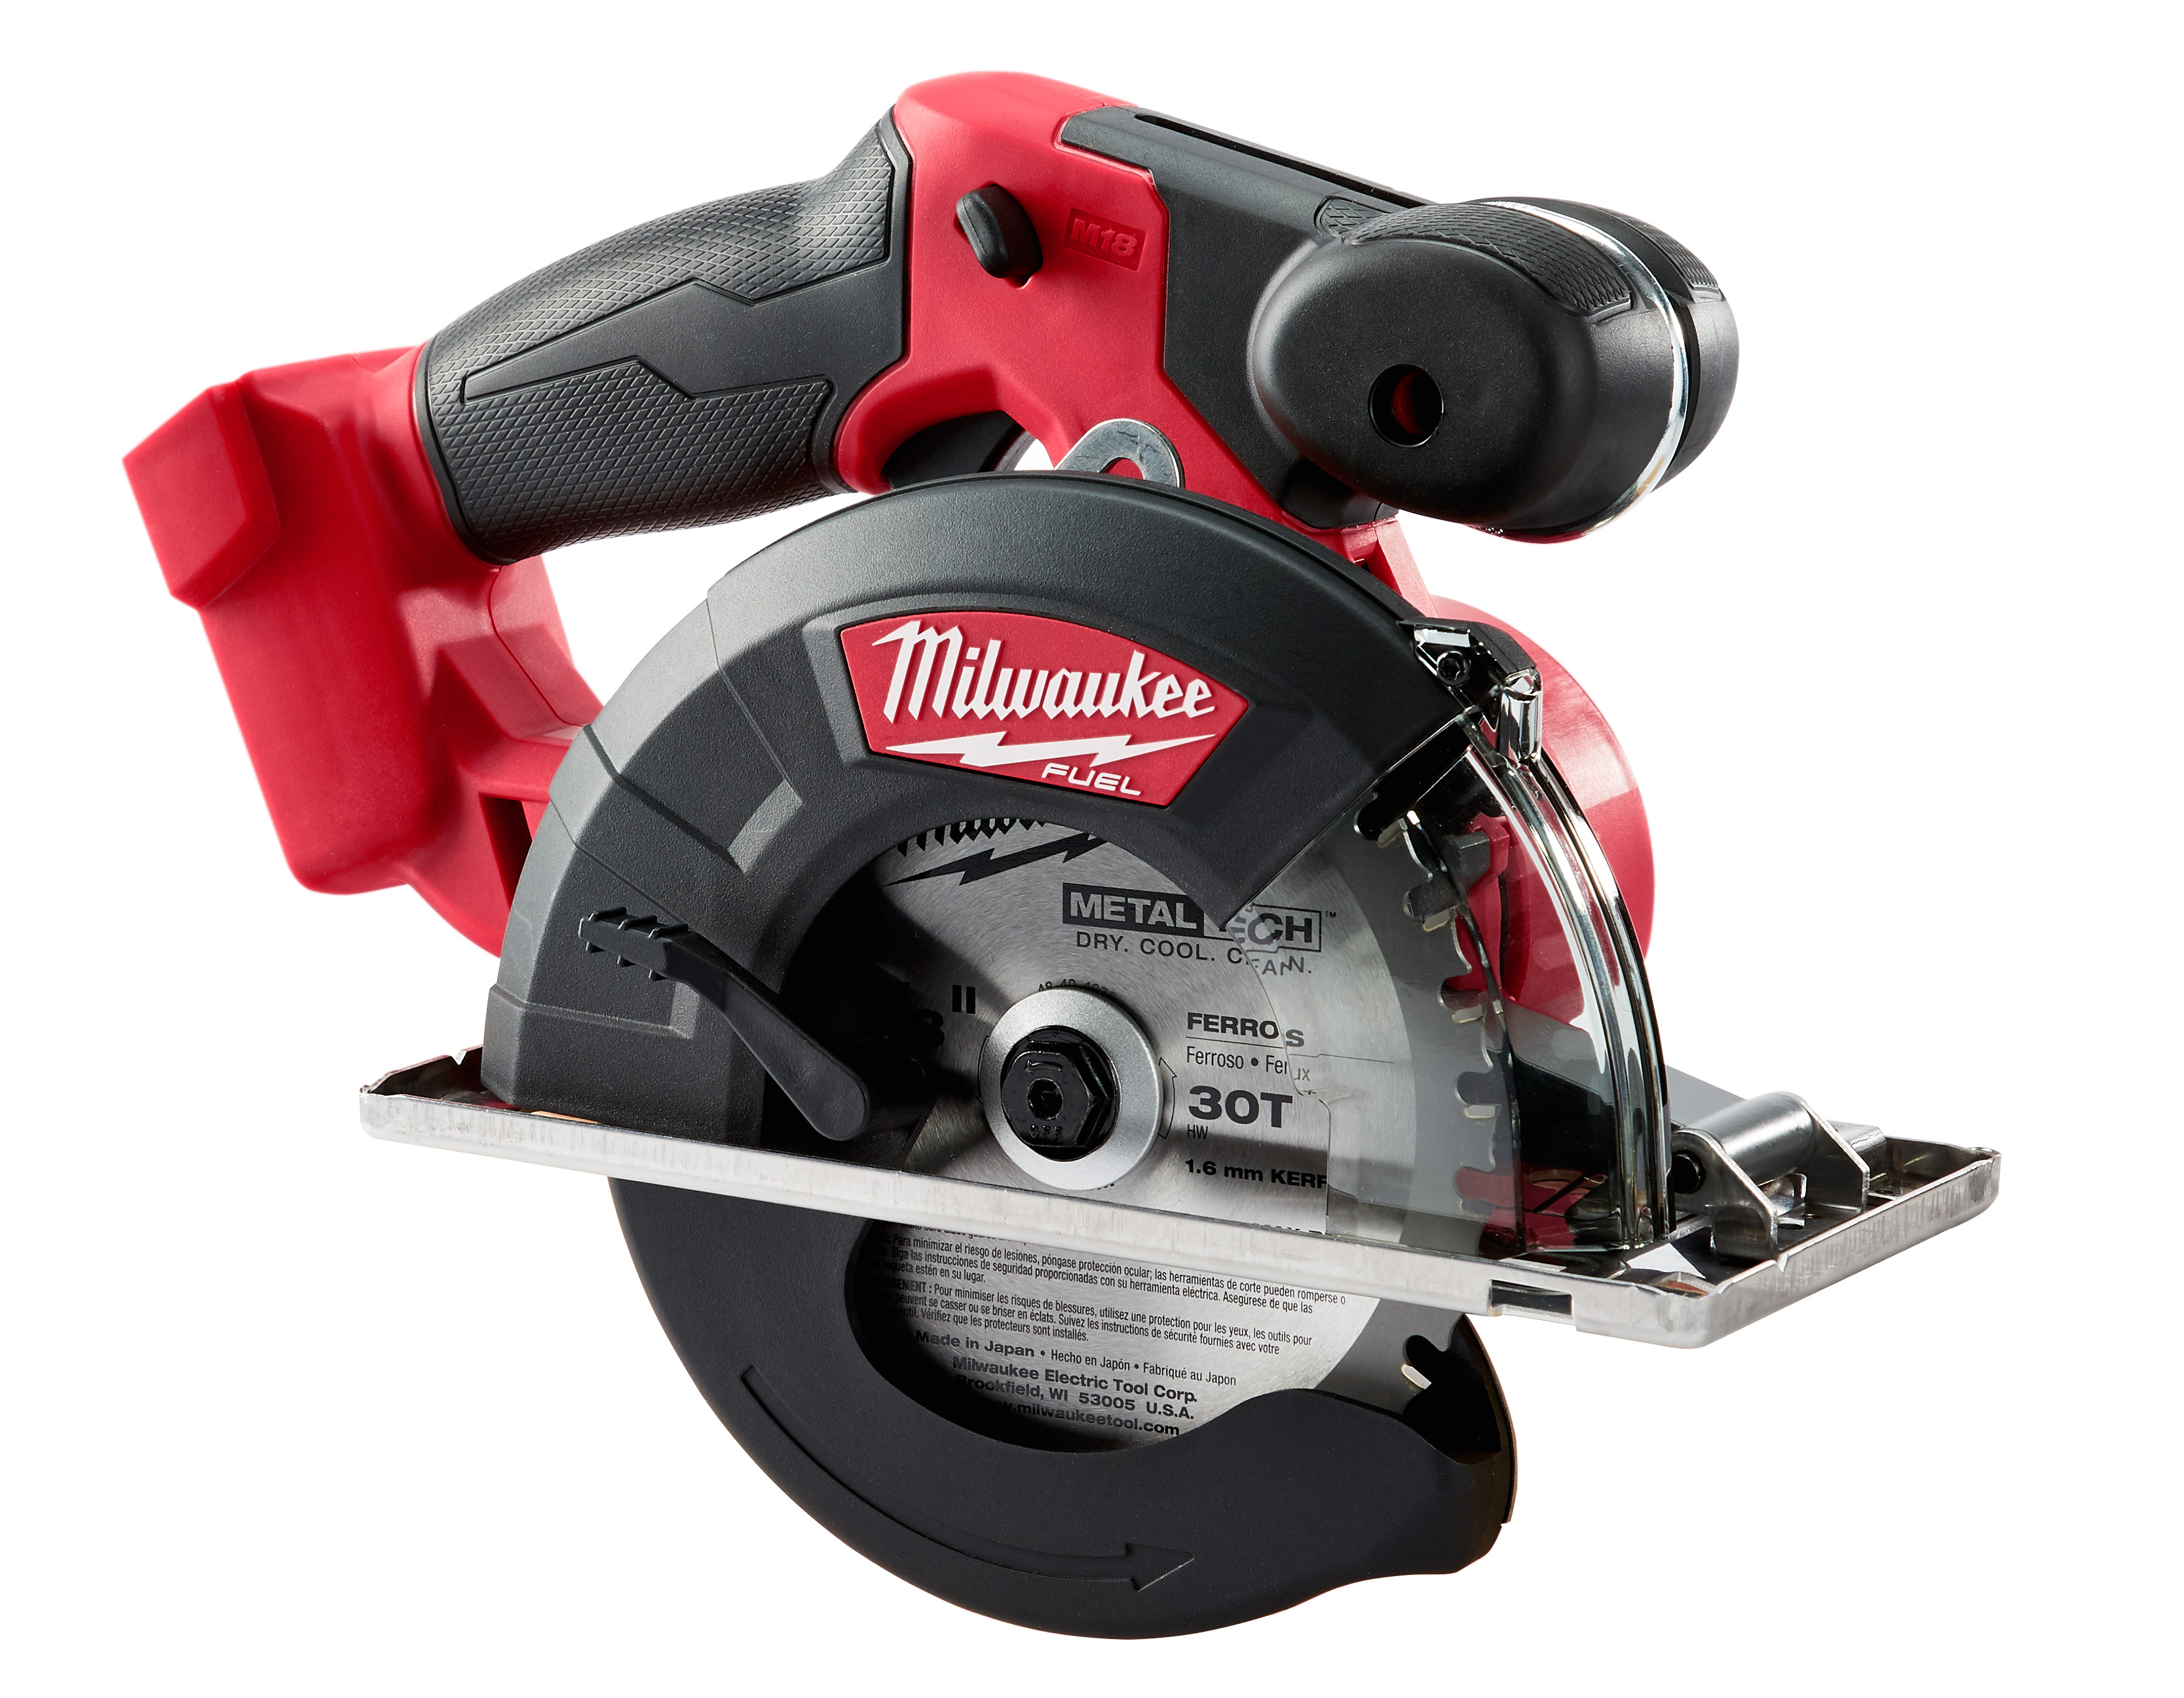 The M18 FUEL™ 5-3/8 in. – 5-7/8 in. metal saw delivers the fastest cuts with the longest tool life and up to 370 cuts in 3/4 in. EMT. This compact and lightweight metal cutting saw utilizes a POWERSTATE™ brushless motor with 3,900 RPMs to deliver the fastest cutting speeds and longest tool life on the market. The metal saw also features REDLINK Plus™ intelligence, the most advanced system of cordless power tool electronics, for maximum performance and unmatched durability. The M18™ REDLITHIUM™ XC5.0 battery pack delivers up to 370 cuts in 3/4 in. EMT which is 1 cut per minute for over 6 hours straight. The Milwaukee M18 FUEL™ 5-3/8 in. – 5-7/8 in. metal saw features a compact, low-profile design for easy handling and increased control. At only 5.9 lbs, this lightweight circular metal saw delivers easier overhead cuts and less user fatigue. The new saw offers an integrated hang hook that allows for easy storage while the tool is not in use. The extra-large cut guide, impact resistant window and LED light ensure superior line of site and the stainless steel shoe reduces chip build-up to prevent surface marring. The 2782 M18 FUEL™ metal saw features a 30T carbide-tipped metal saw blade for cool, burr-free cuts through EMT, strut, threaded rod, sheet metal, angle iron and other ferrous materials. Backed by Milwaukee's 5-year warranty, the 2782-20 comes equipped with a 30T 5-3/8 in. metal tech ™ carbide-tipped metal saw blade and blade wrench.